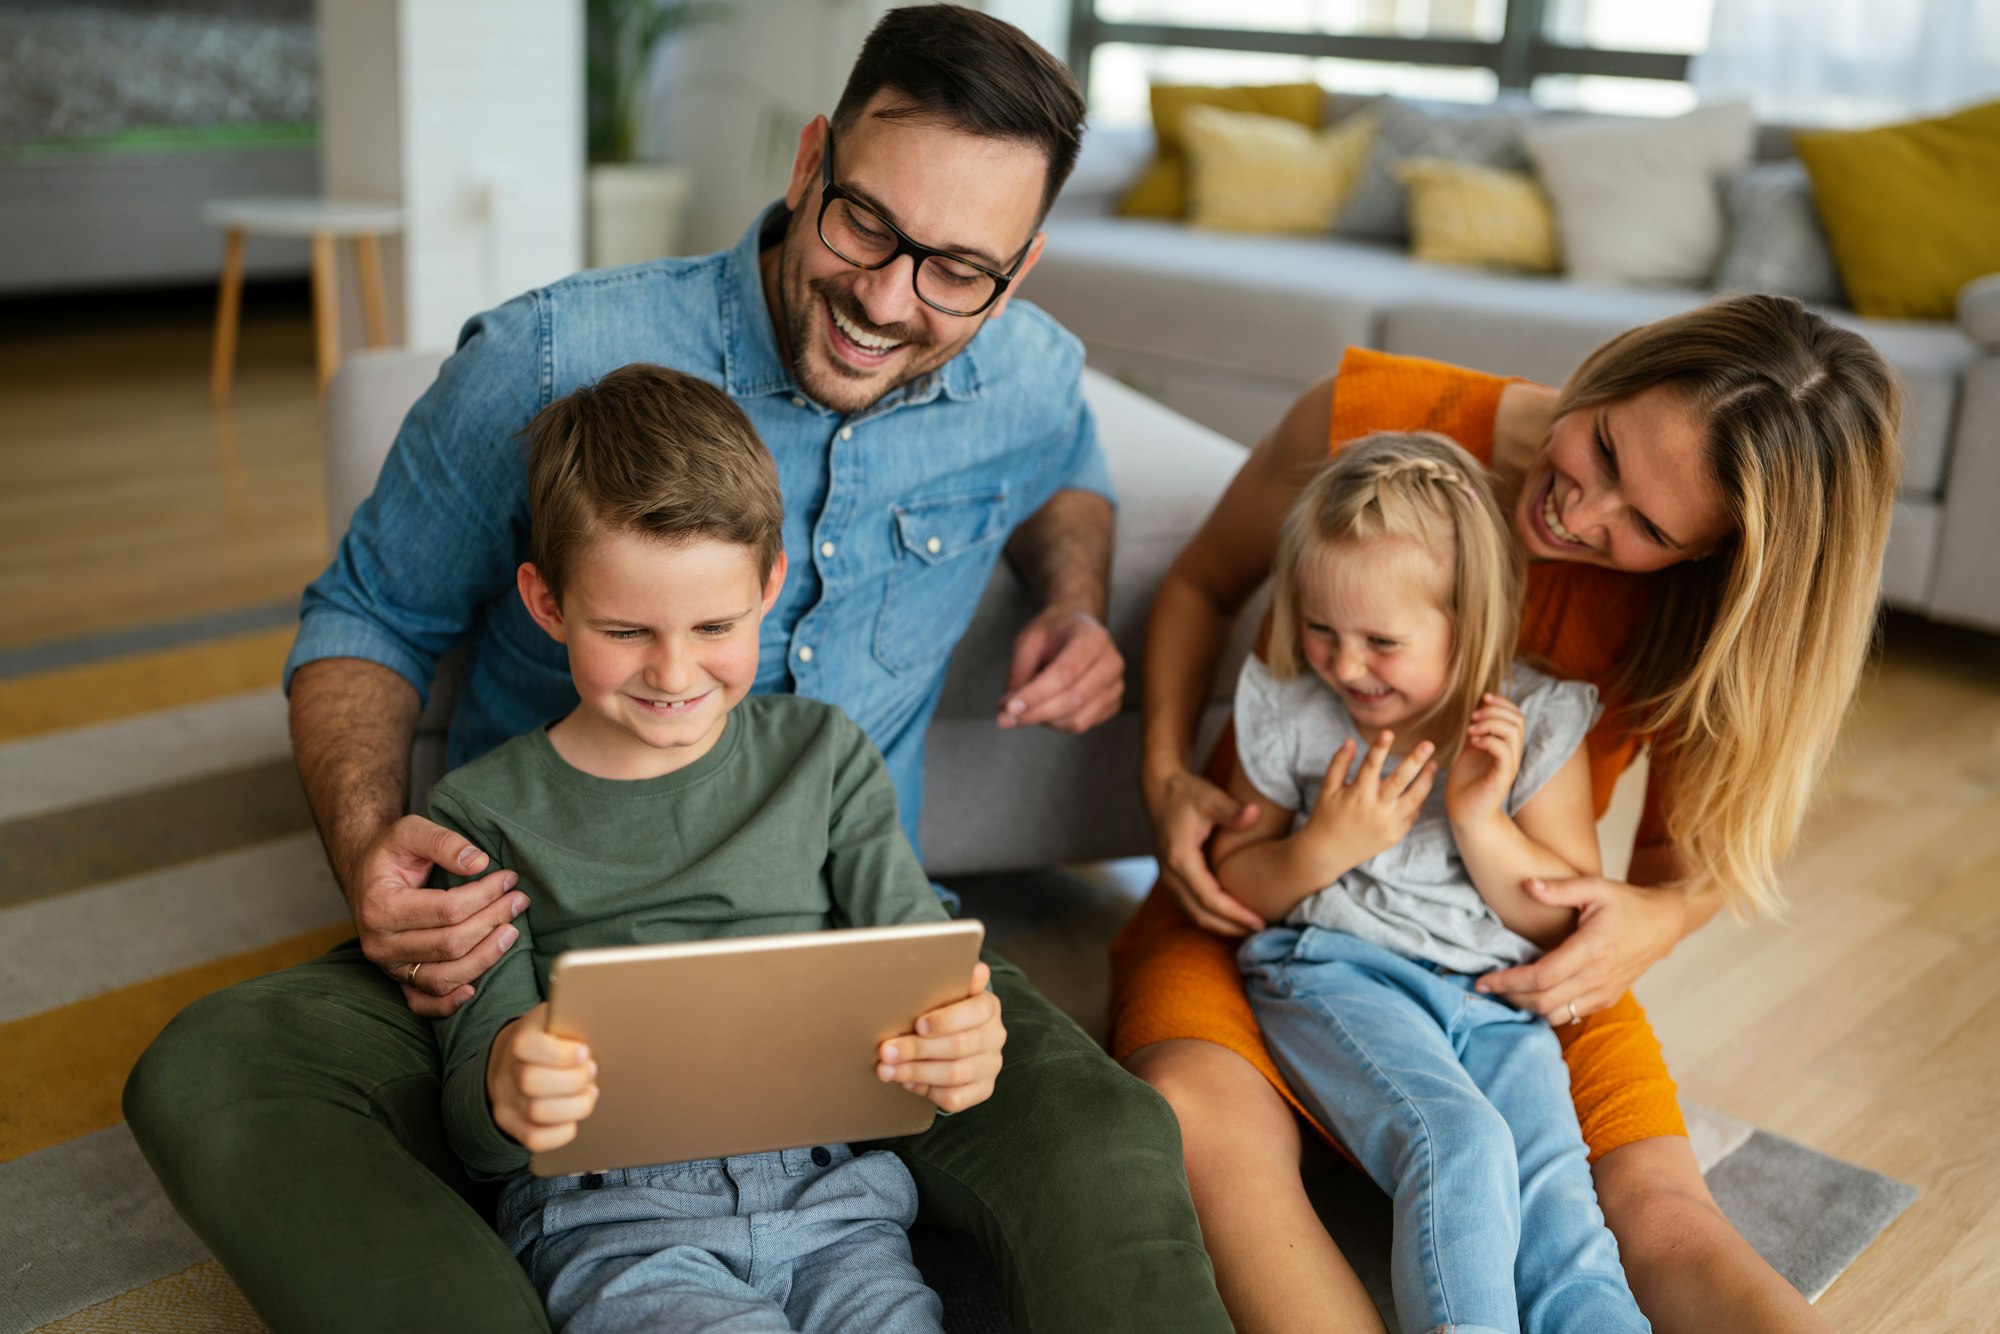 Happy young family having fun time at home. Parents with children using tablet